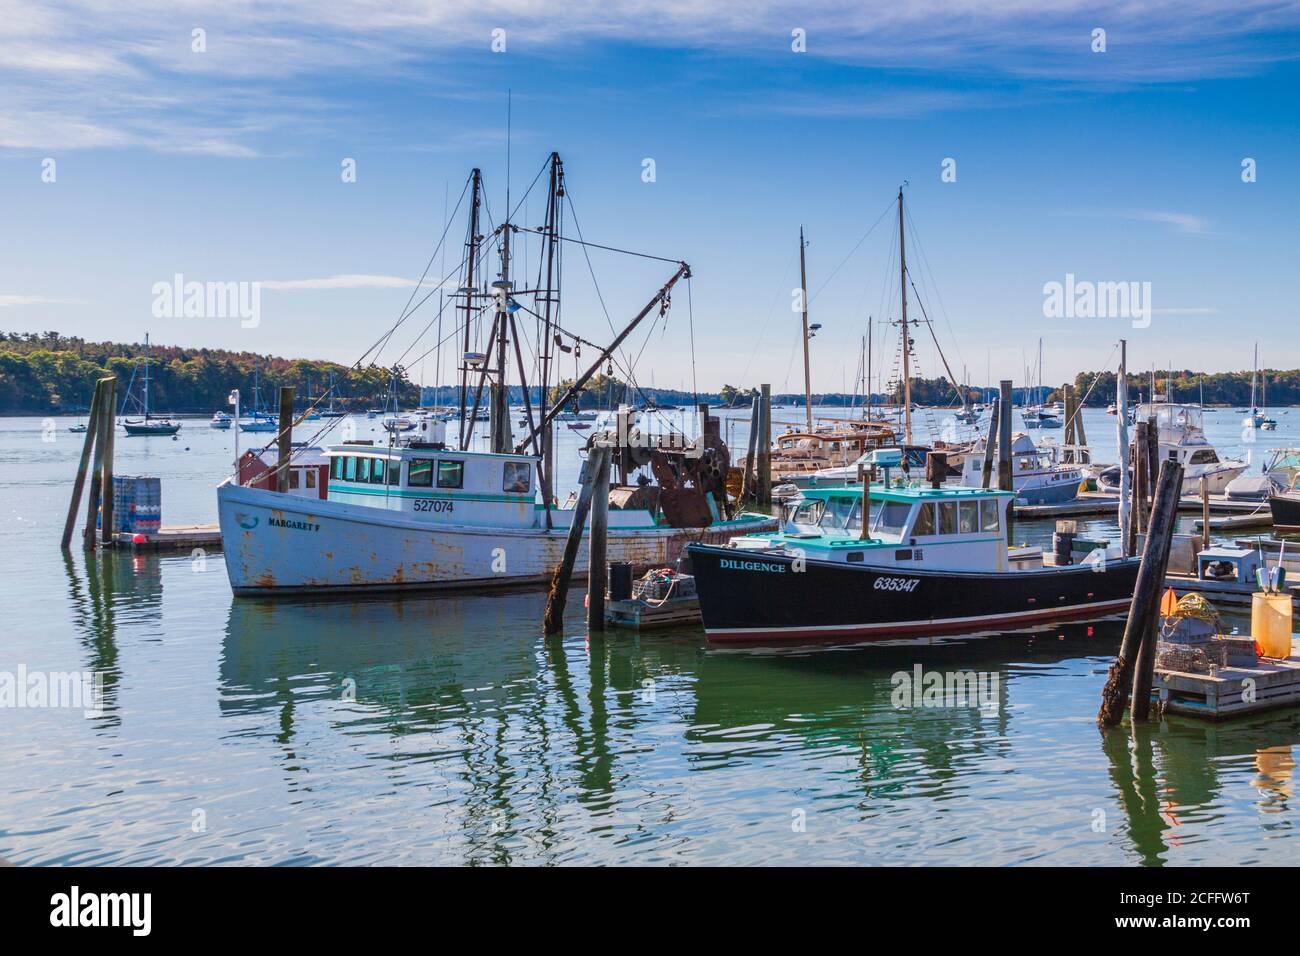 Fishing boats and other boats in South Freeport town harbor, South Freeport, Maine. Stock Photo